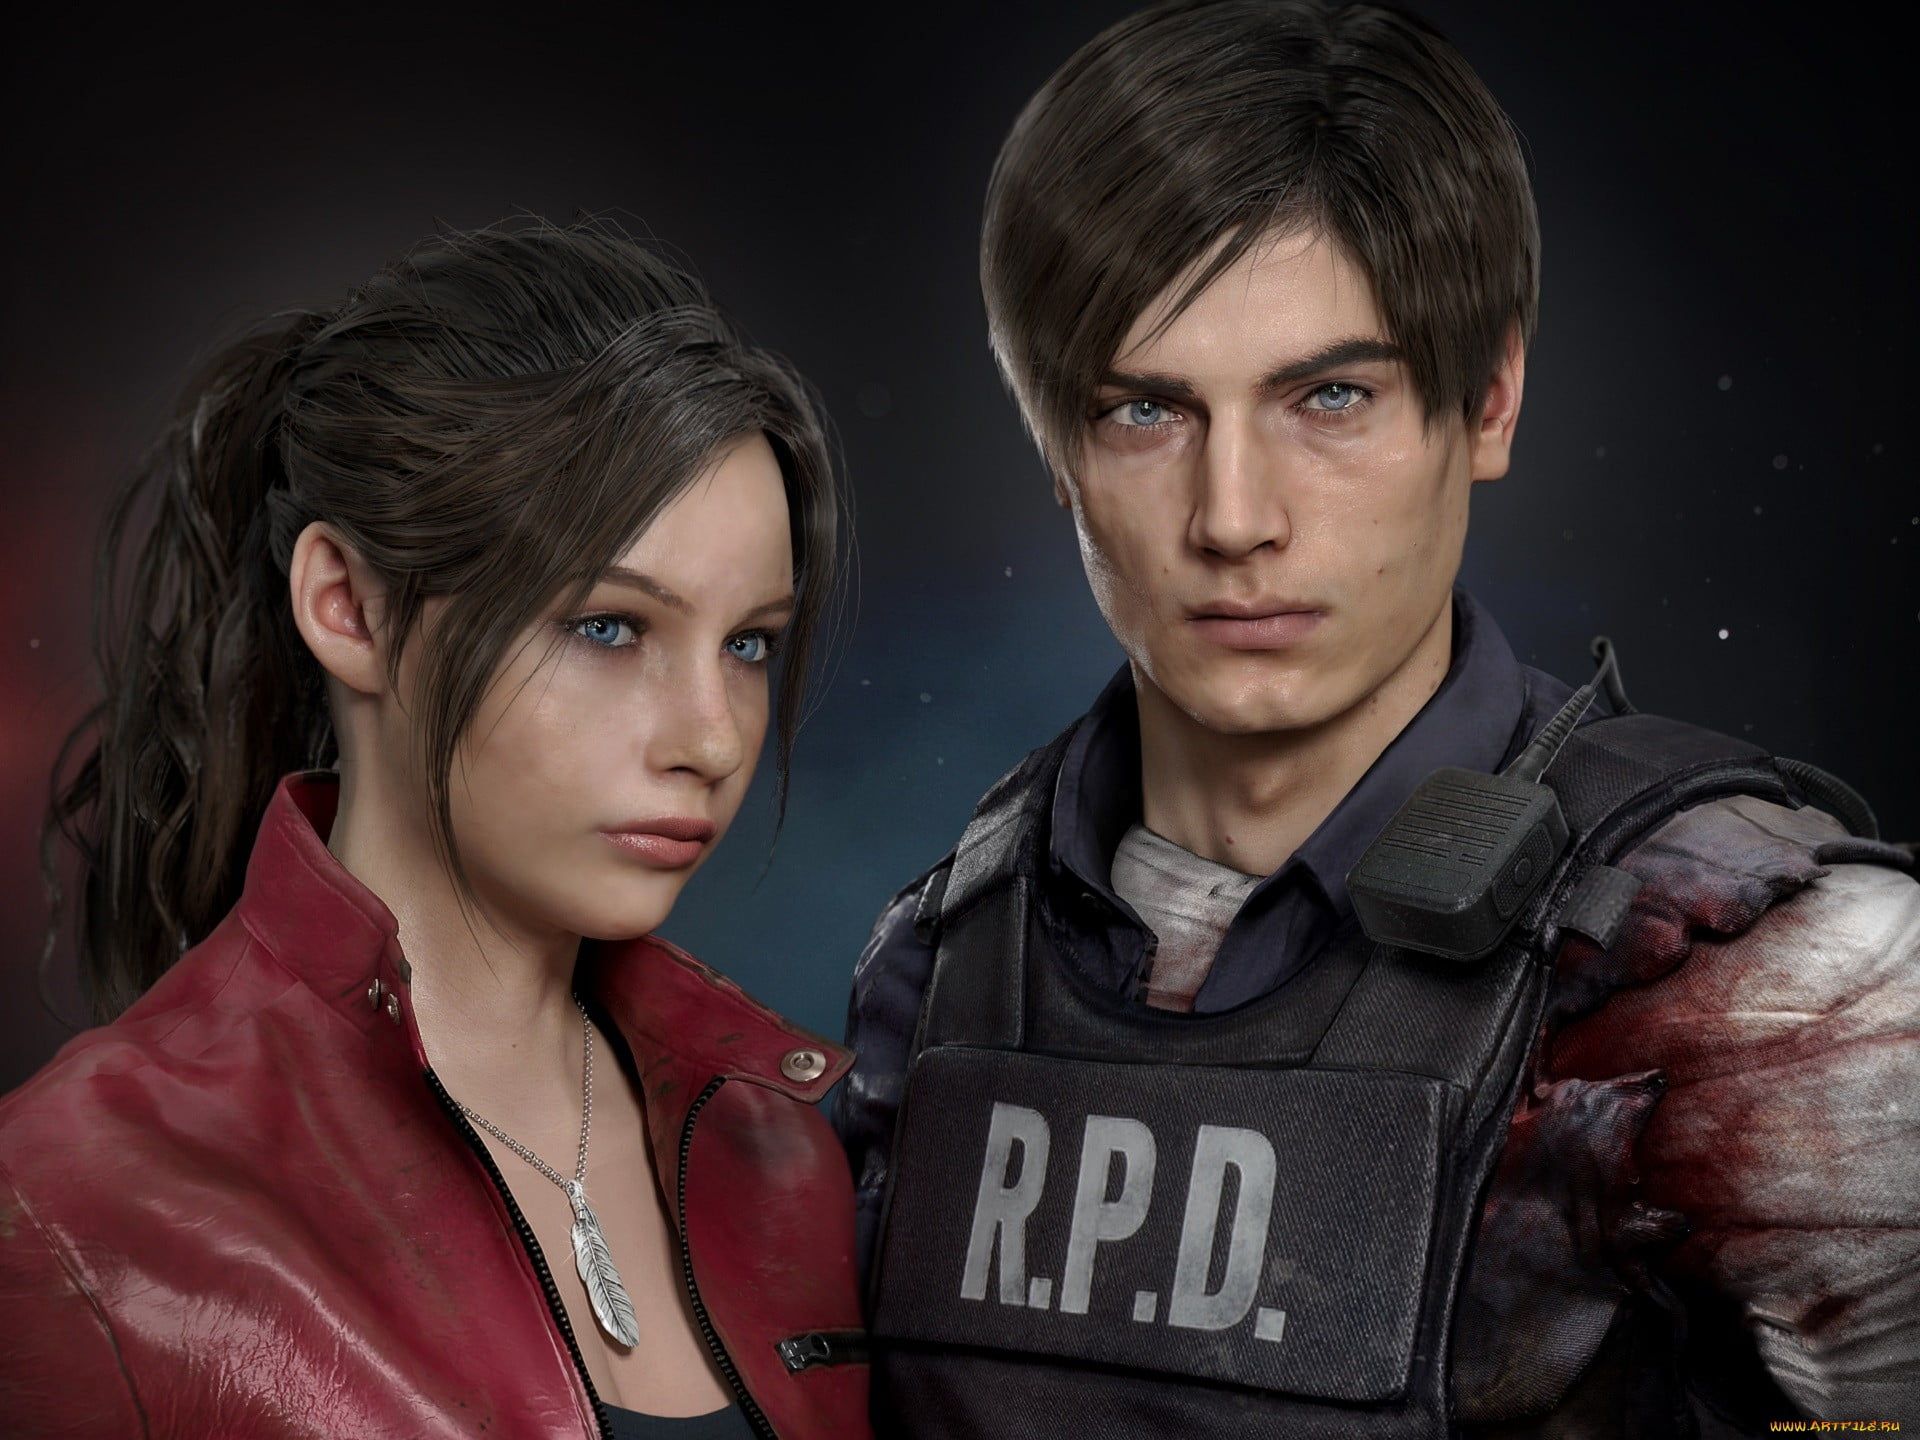 resident evil 2 claire redfield wallpapers Wallpapers